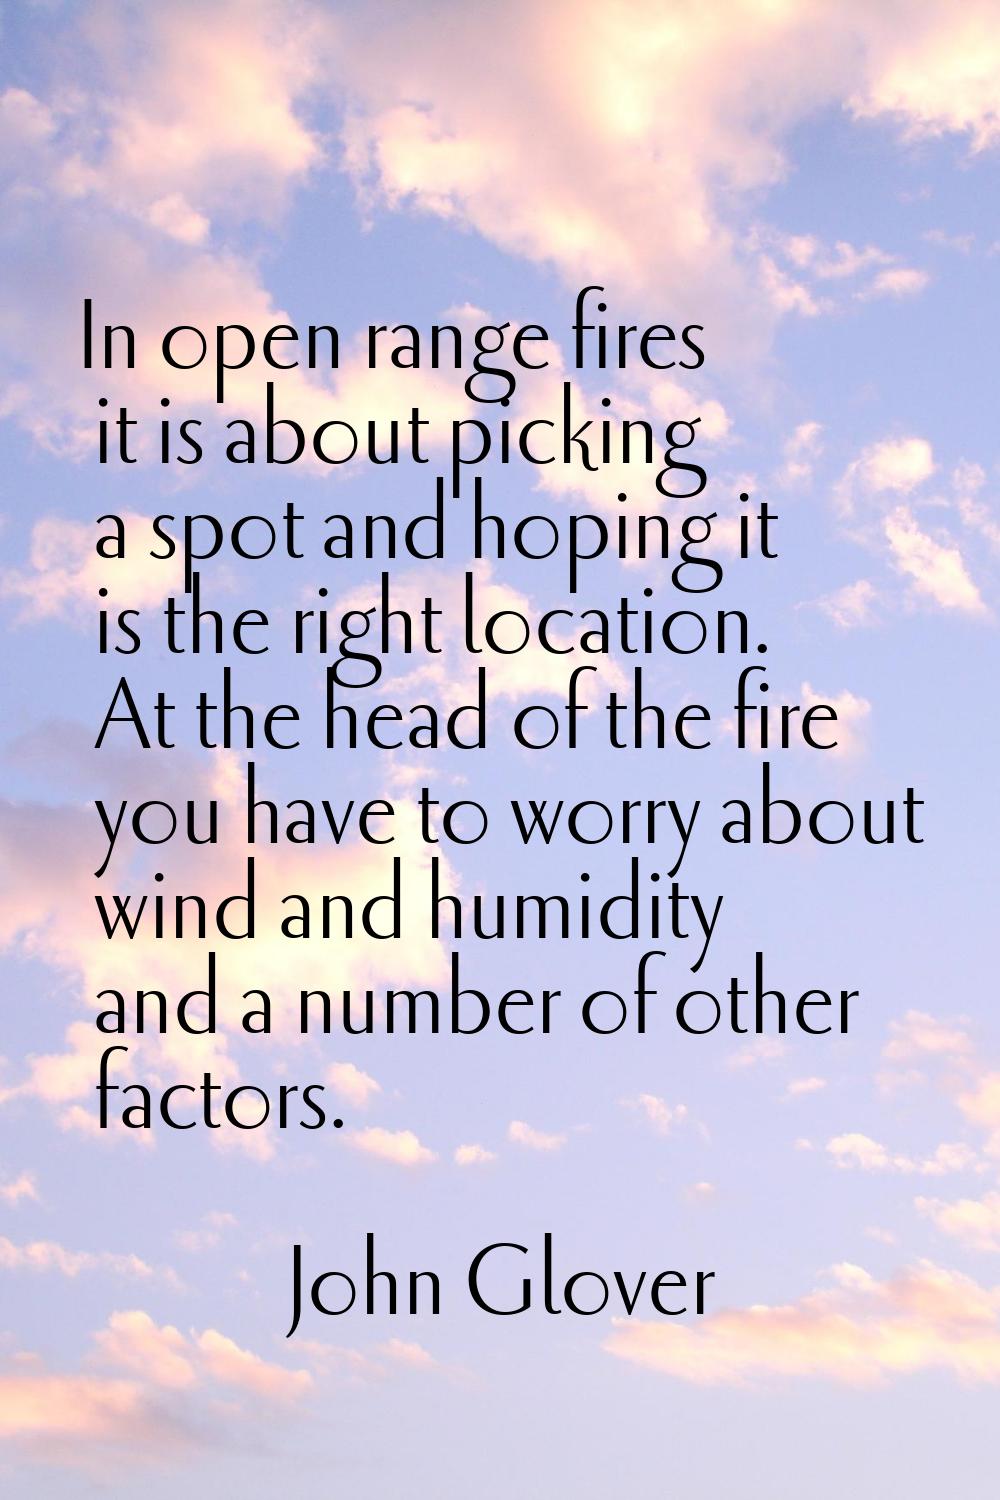 In open range fires it is about picking a spot and hoping it is the right location. At the head of 